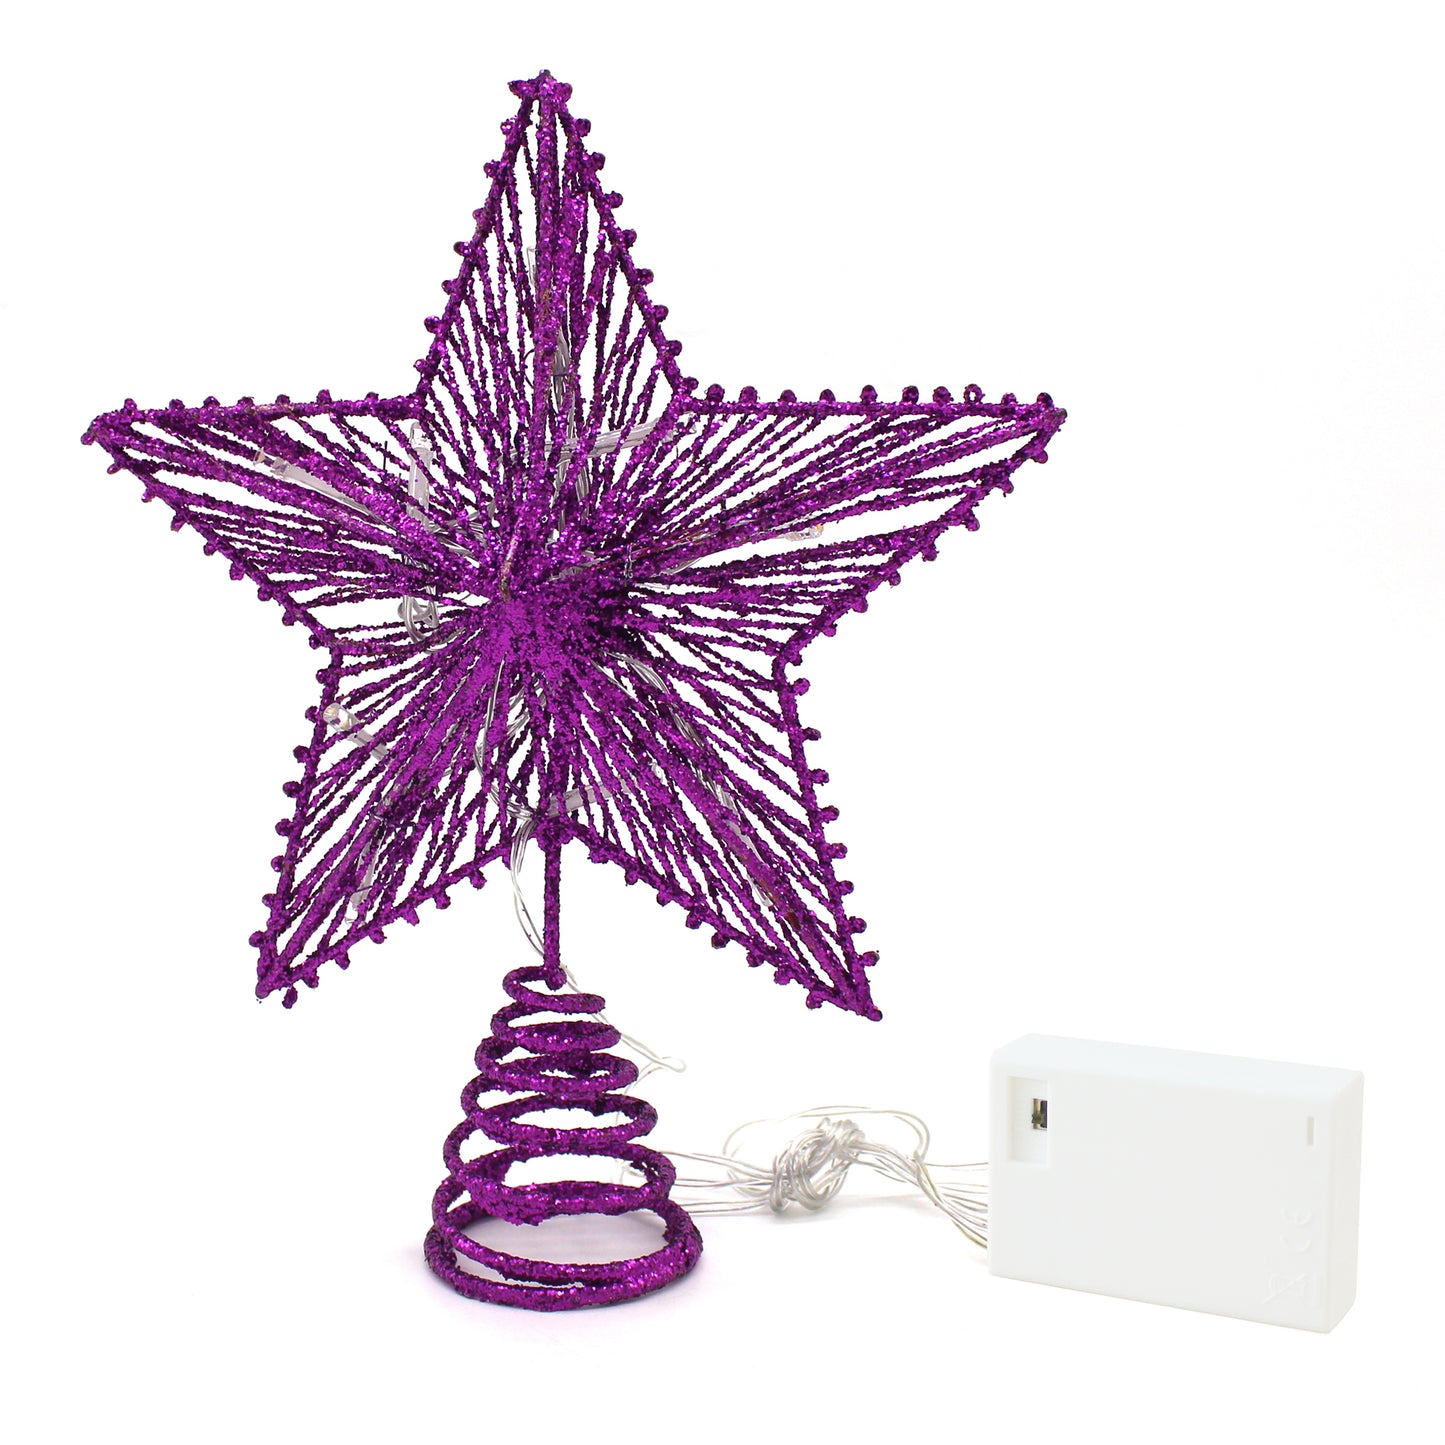 CVHOMEDECO. Violet Glittered 3D Tree Top Star with Warm White LED Lights and timer for Christmas Tree Decoration and Holiday Seasonal Décor, 8 x 10 Inch